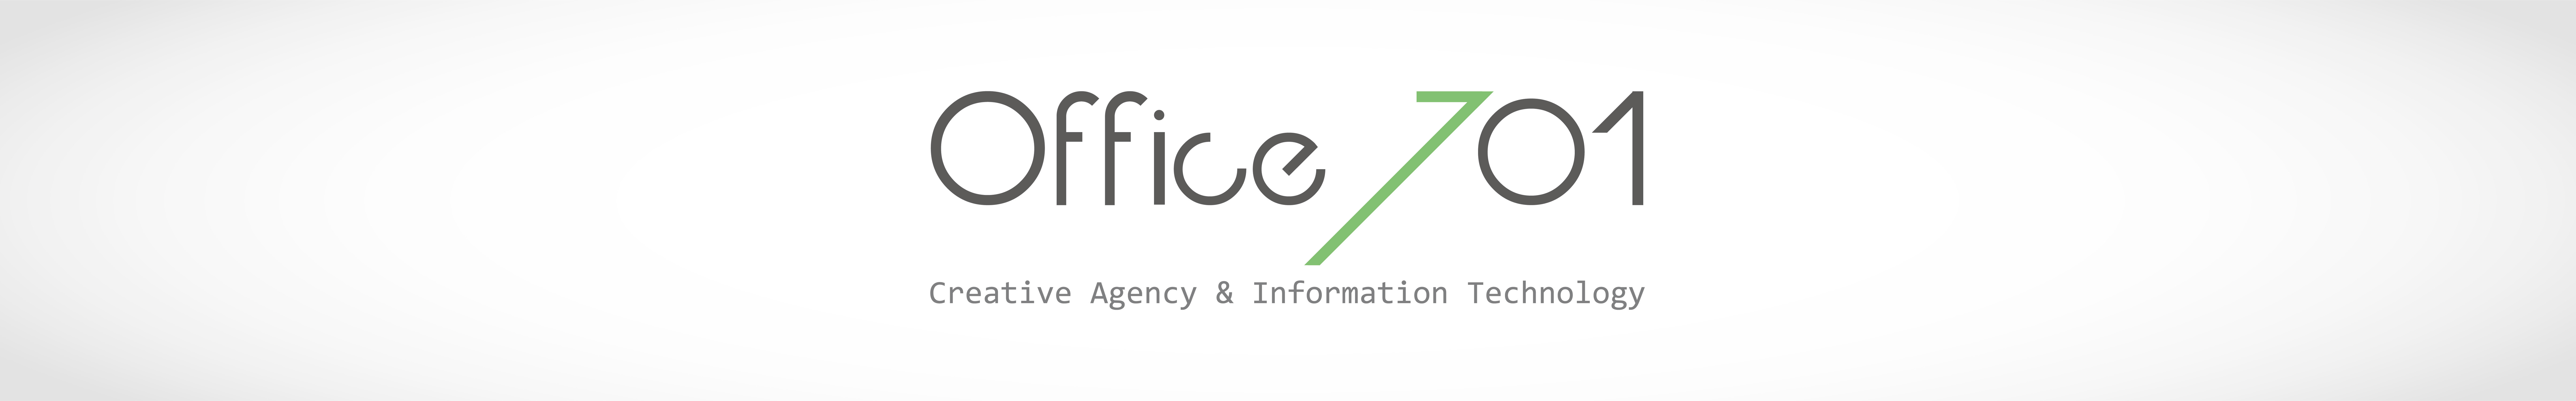 Office701 Creative Agency & Information Technology's profile banner